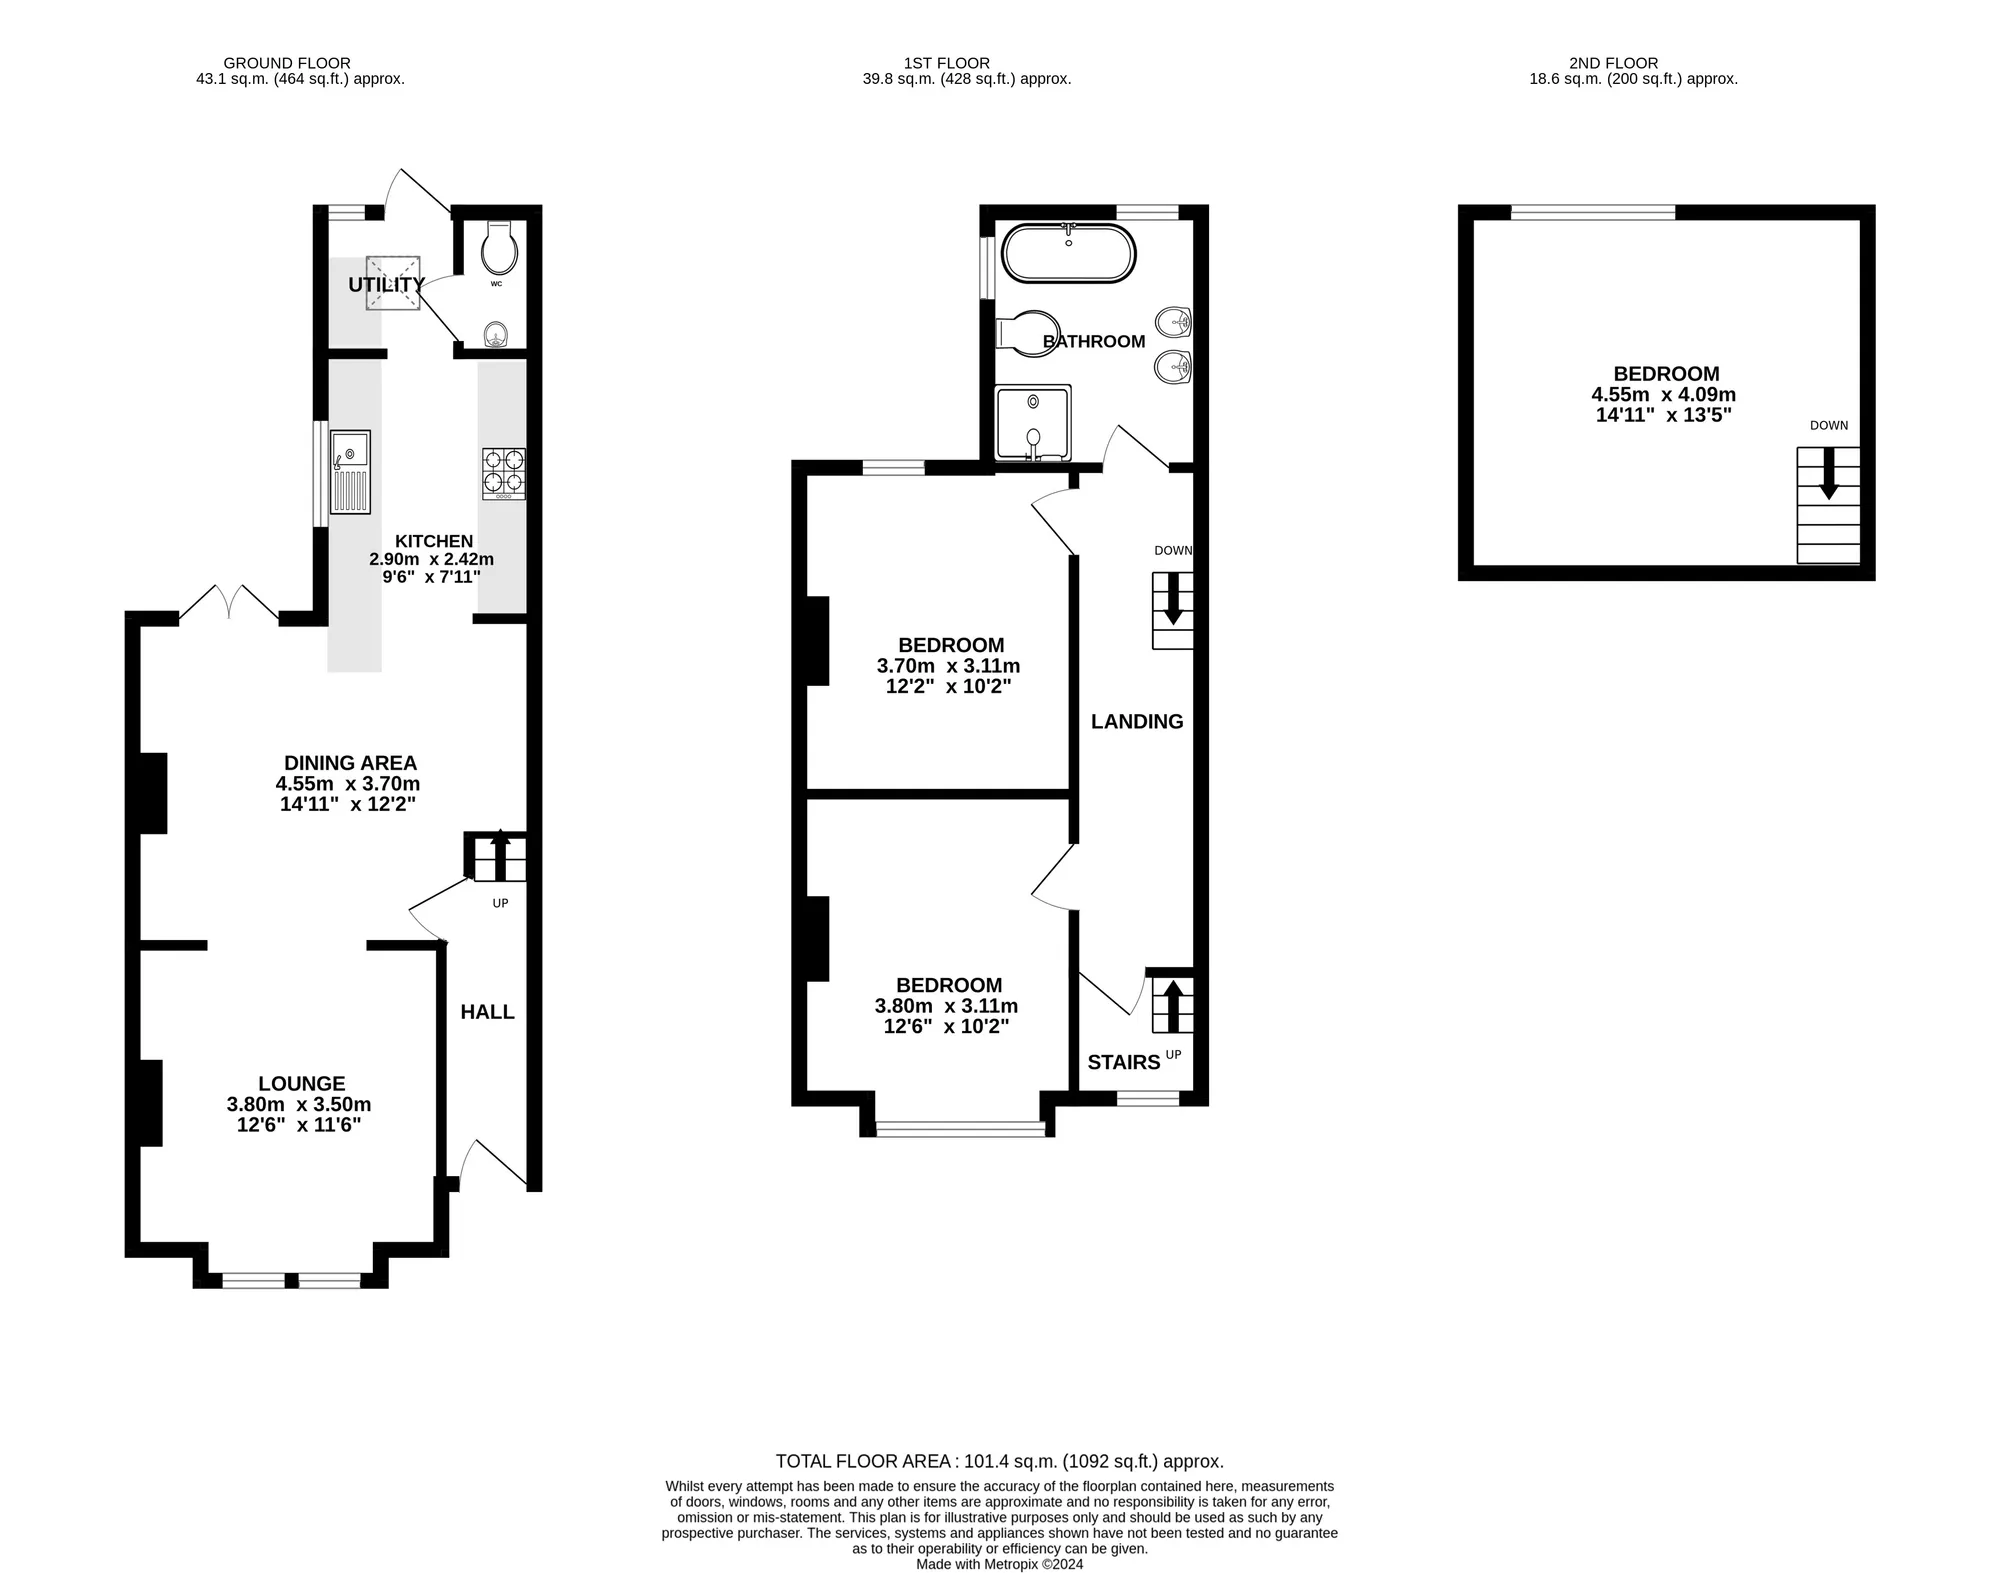 3 bed mid-terraced house for sale in North Road, Poole - Property floorplan